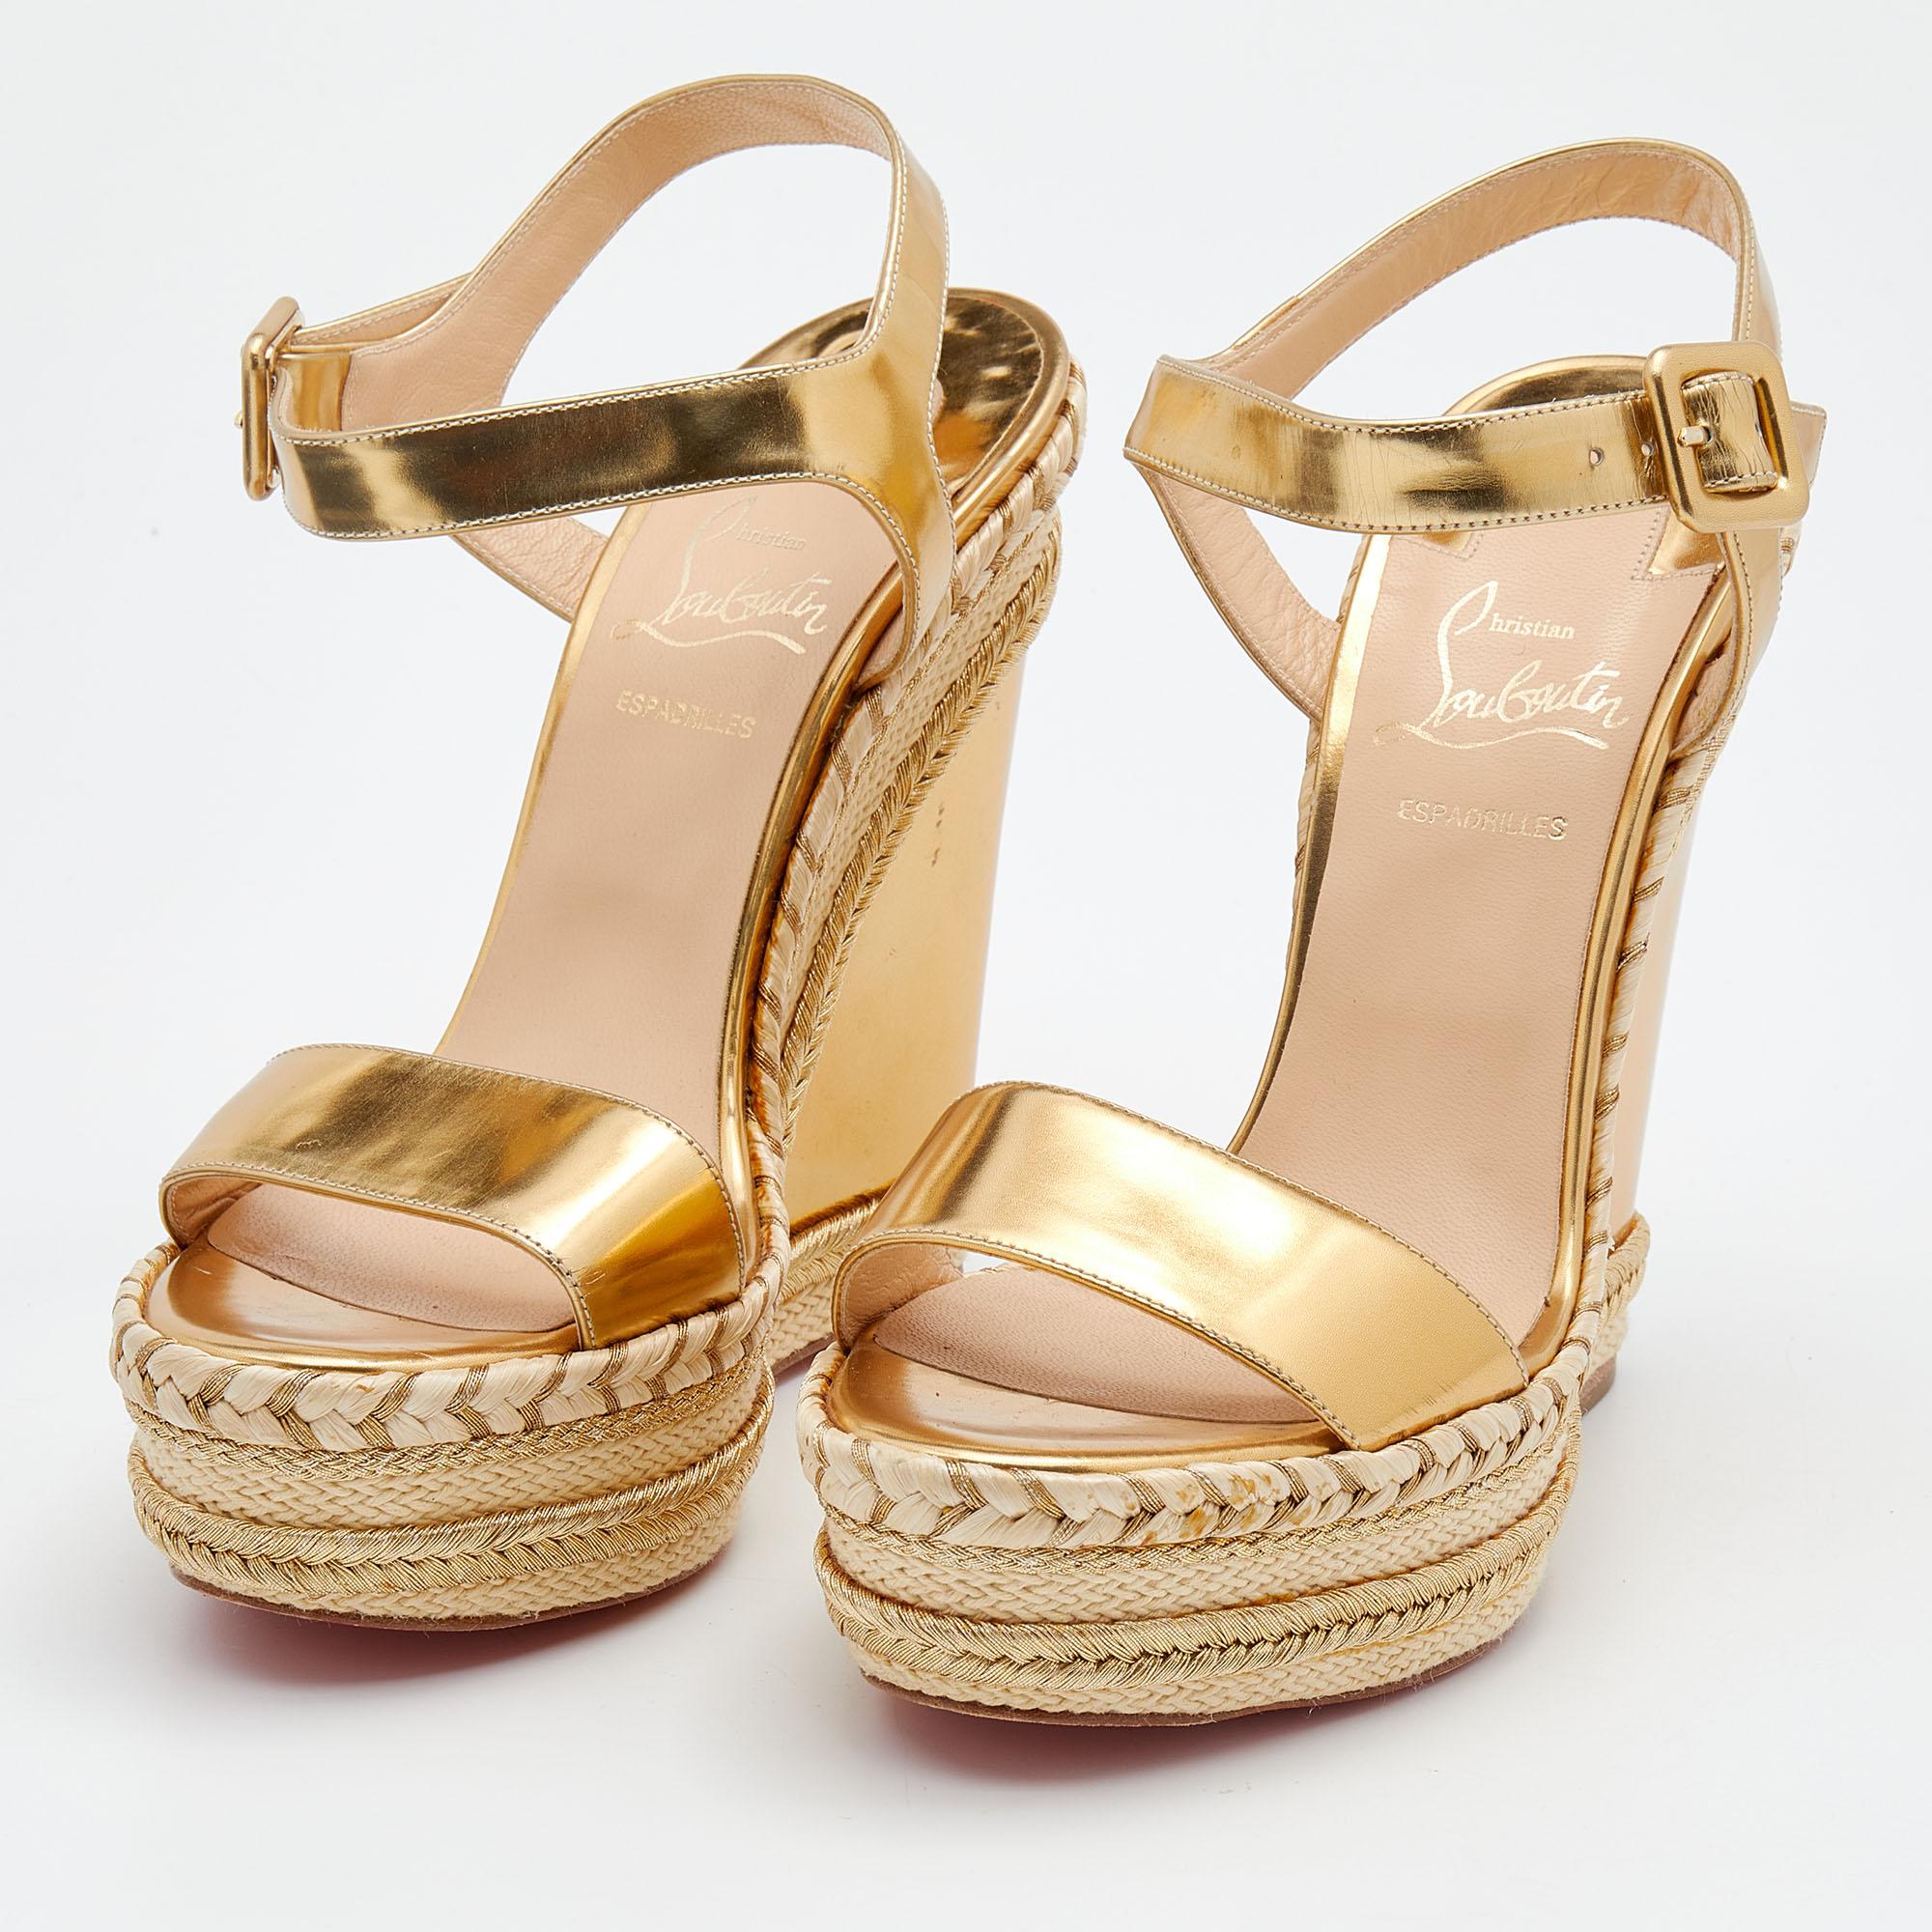 These regal-looking sandals from the house of Christian Louboutin are captivating and glamorous. Made from metallic gold leather, they flaunt platforms, chic wedge heels, and buckled ankle straps. These beauties will match well with your evening